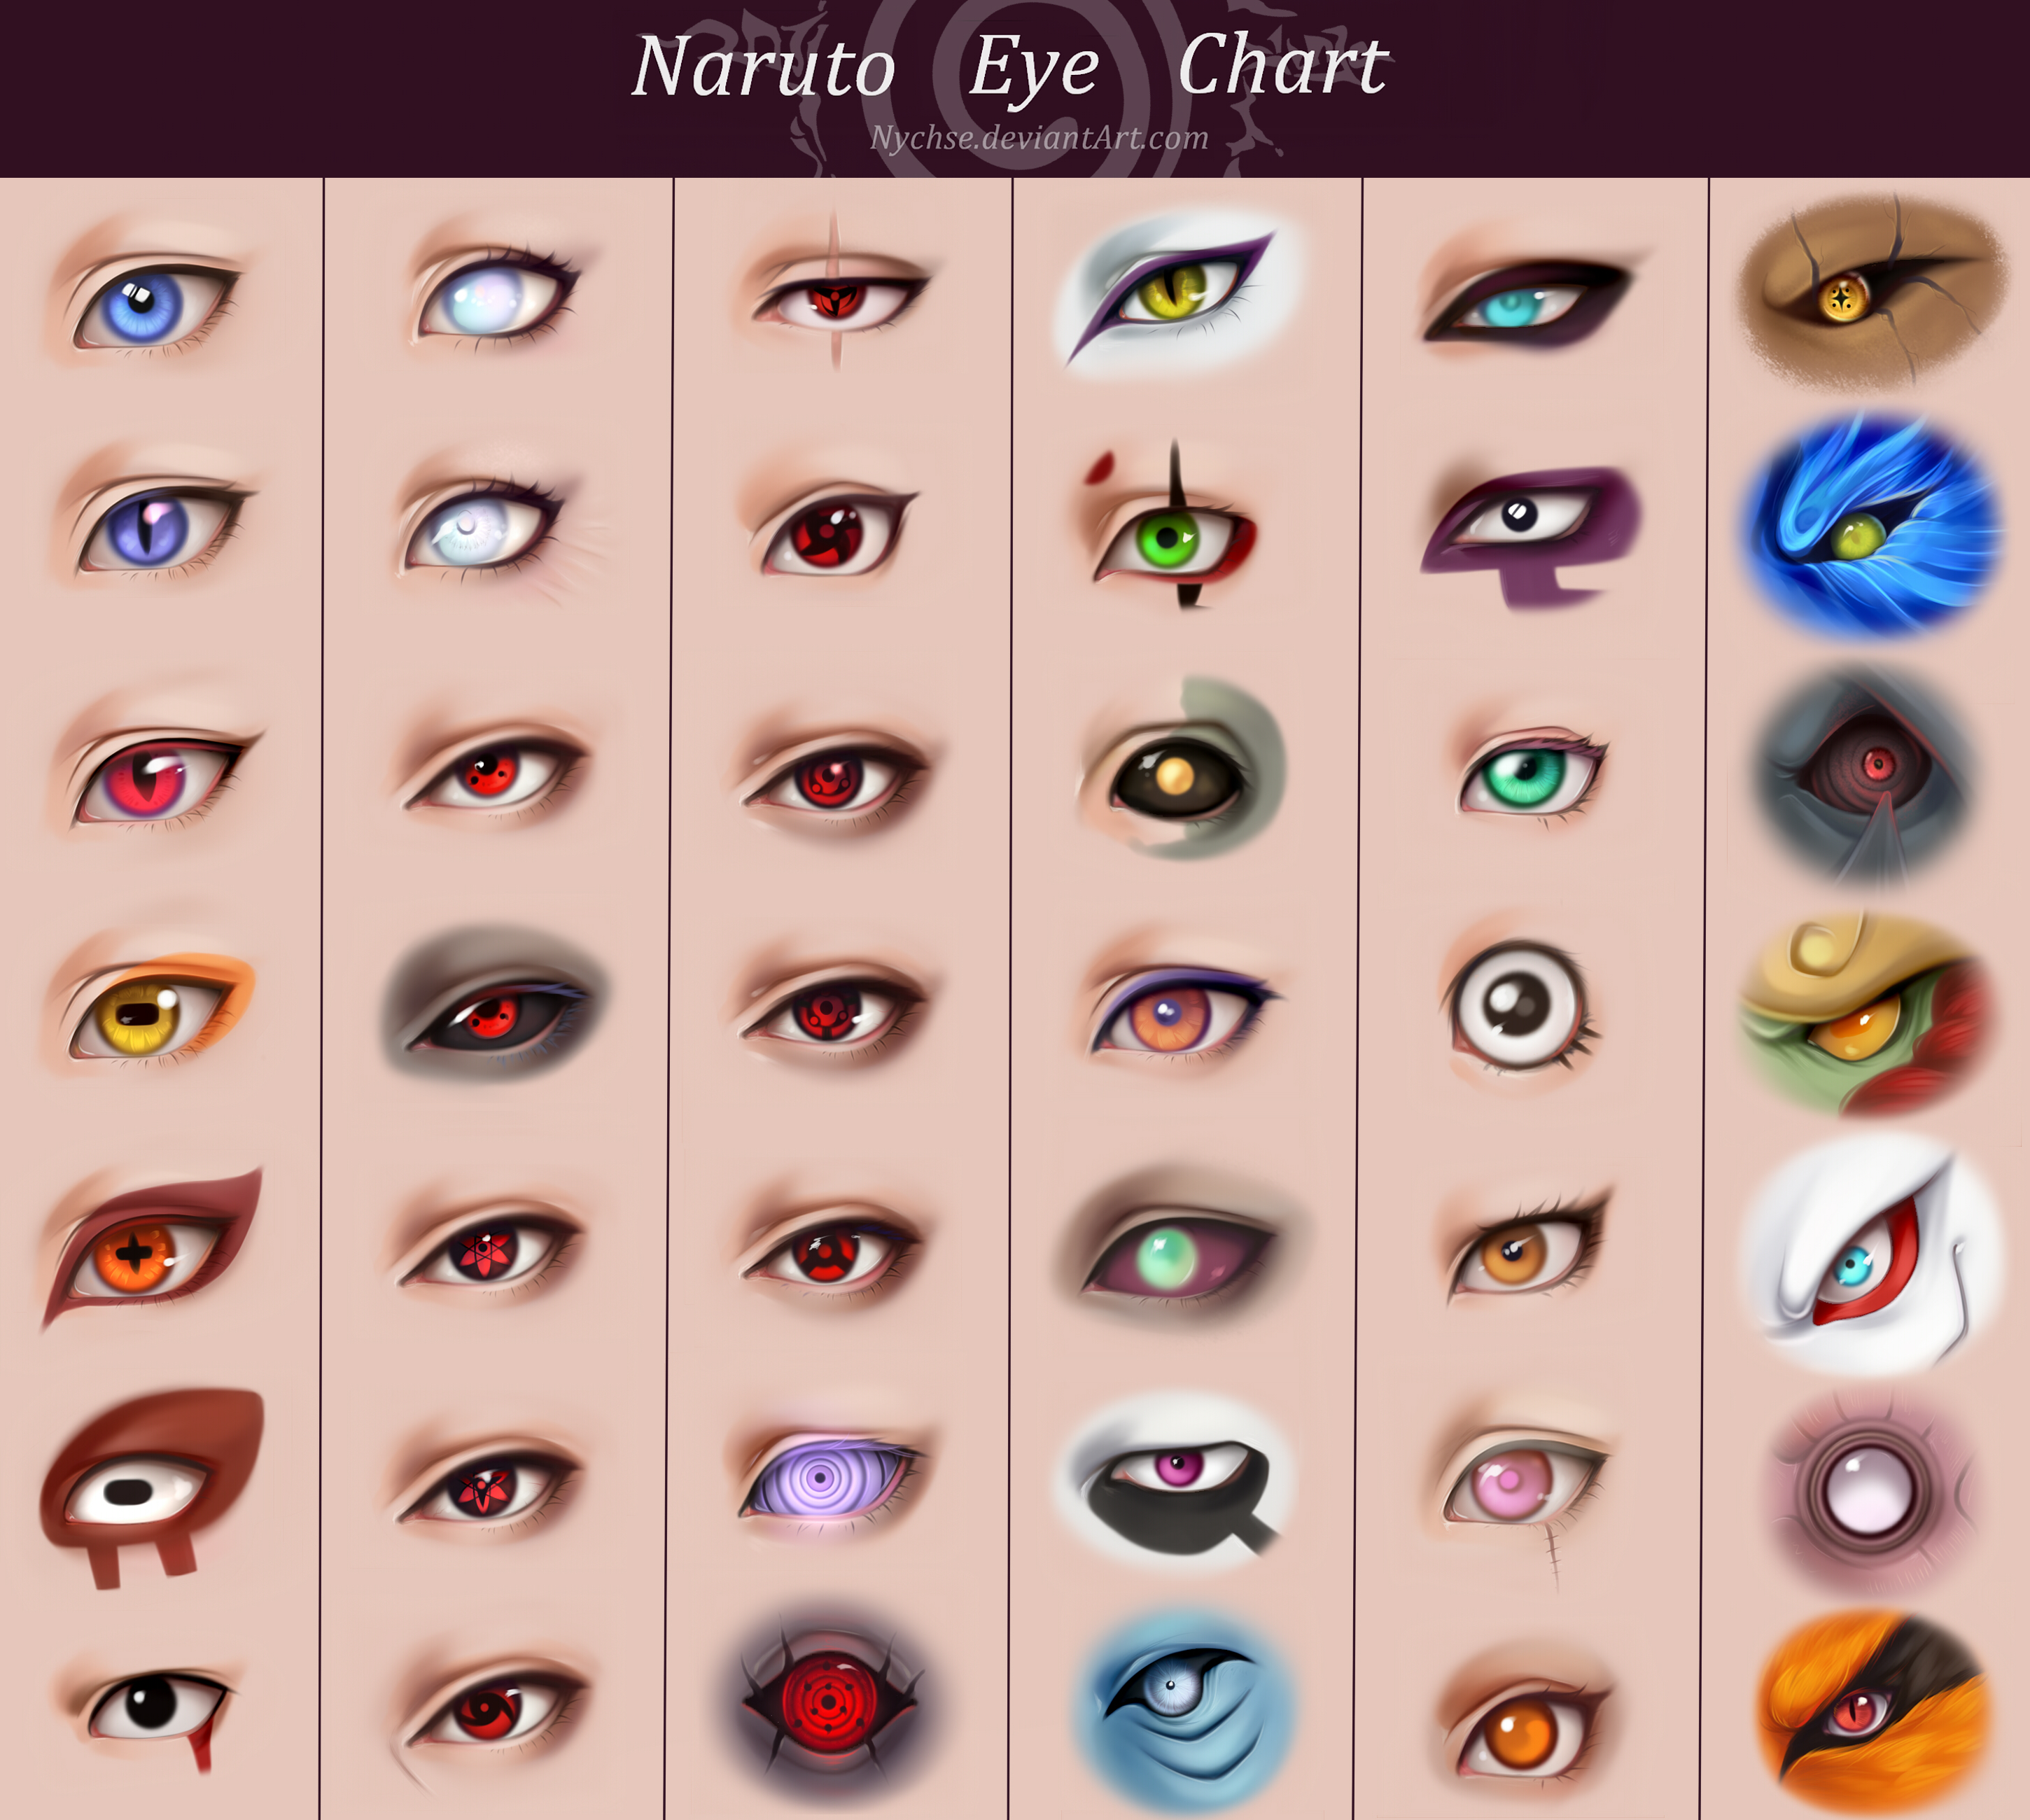 Every Eye Powers in the Naruto Universe Explained - FickleMind